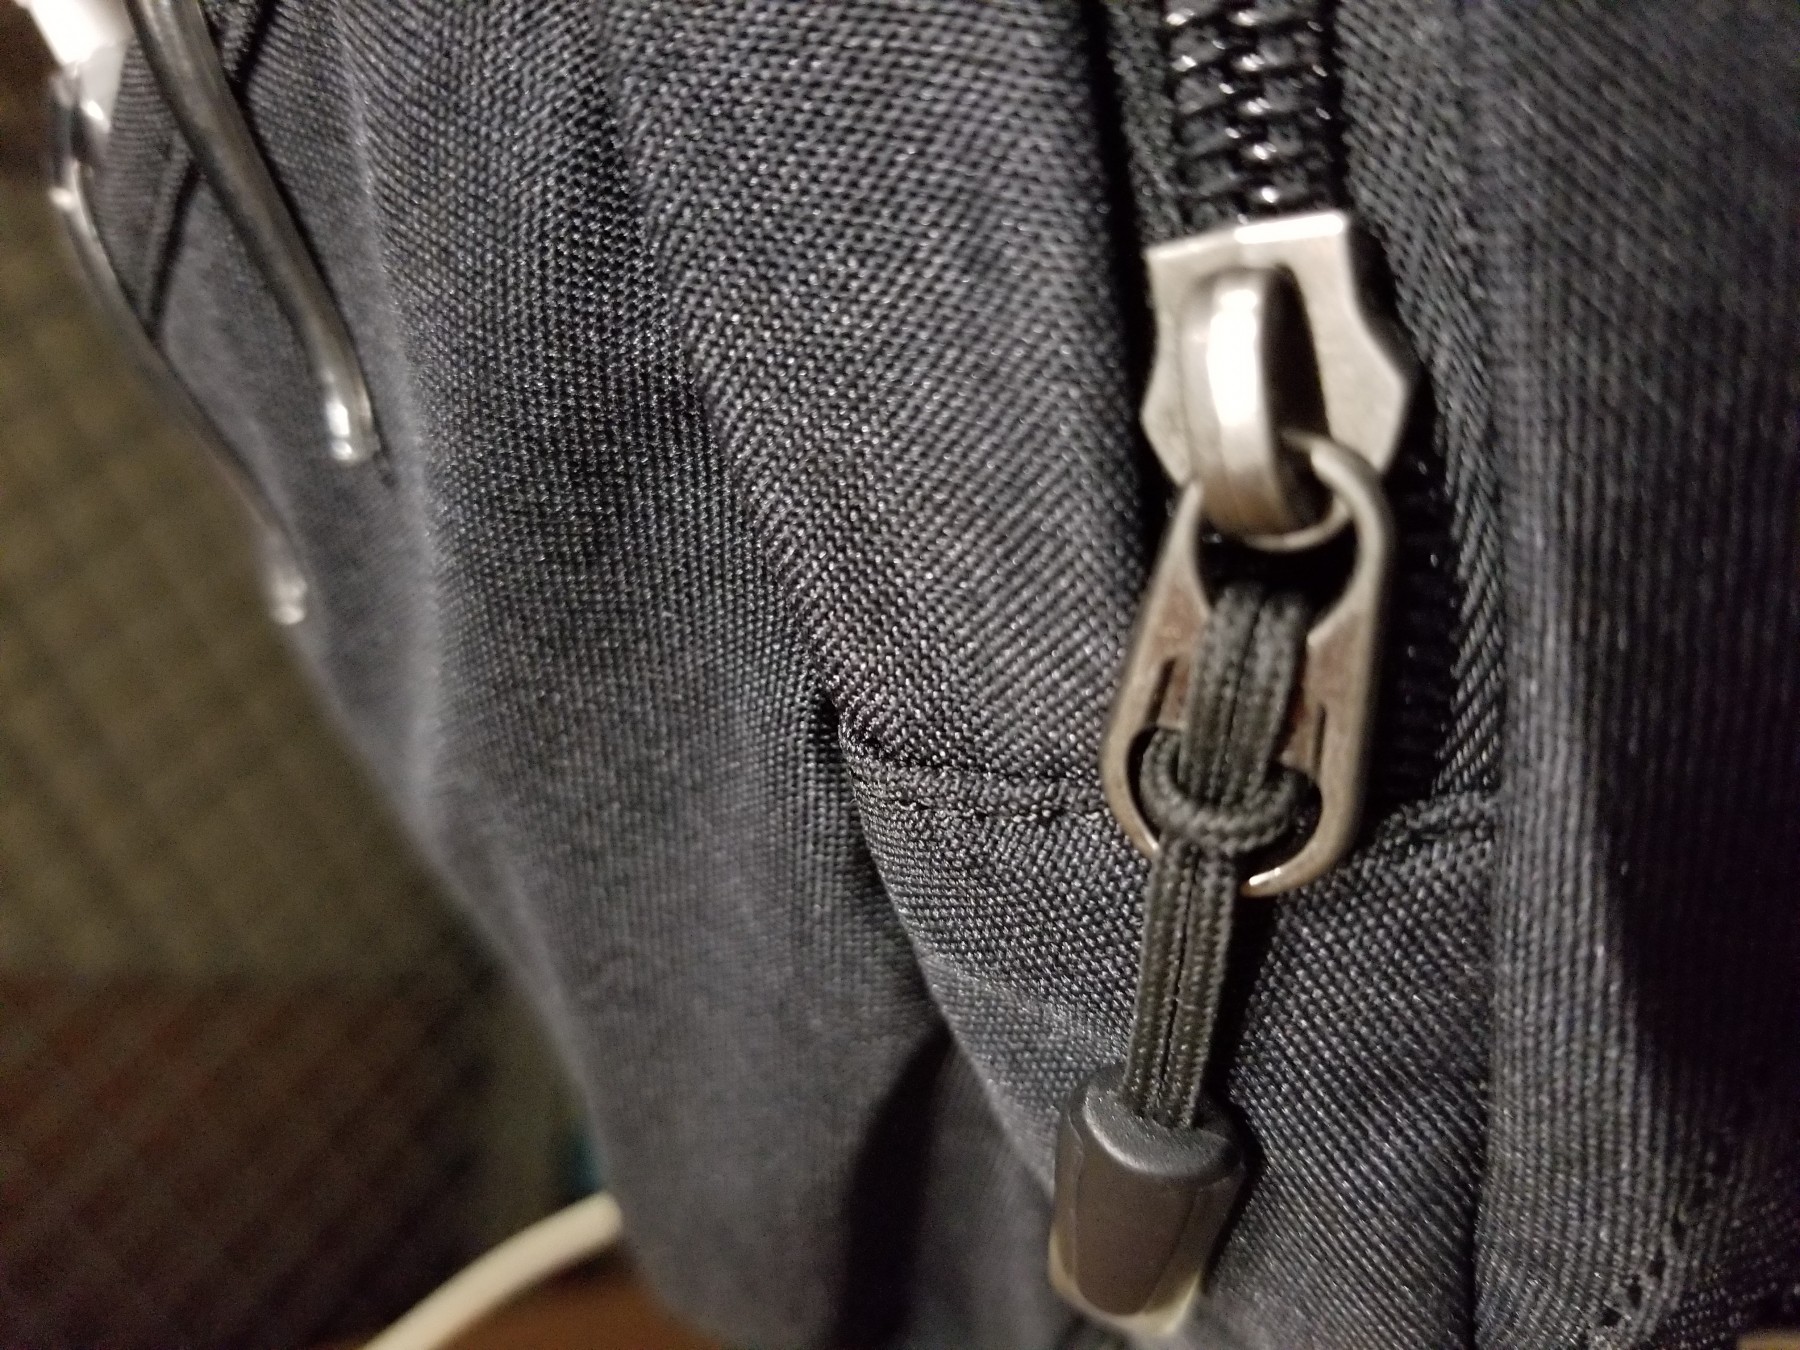 Great backpack! High Quality! Update: falling apart